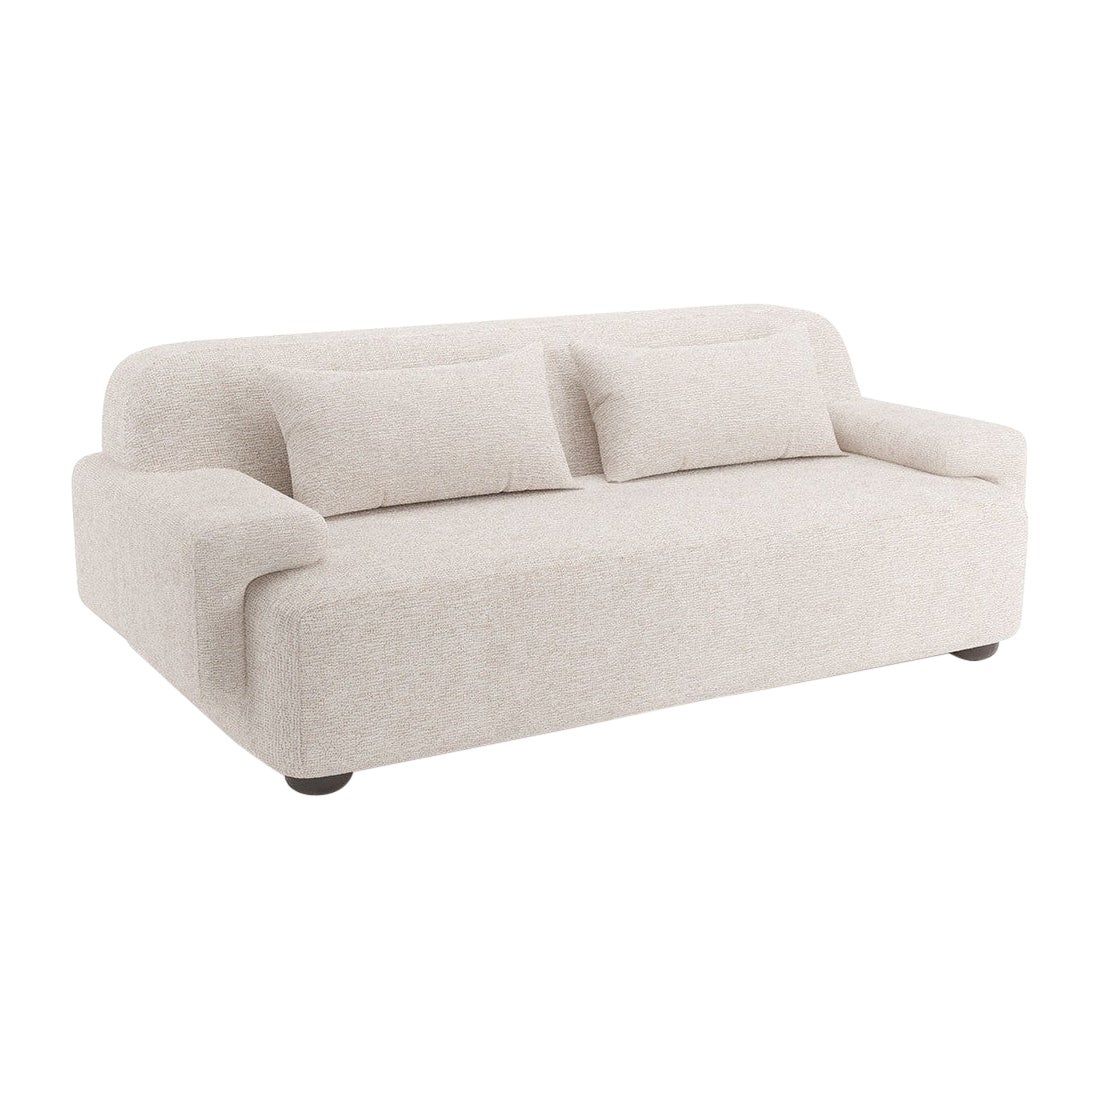 Popus Editions Lena 2.5 Seater Sofa in Otter Megeve Fabric with Knit Effect For Sale